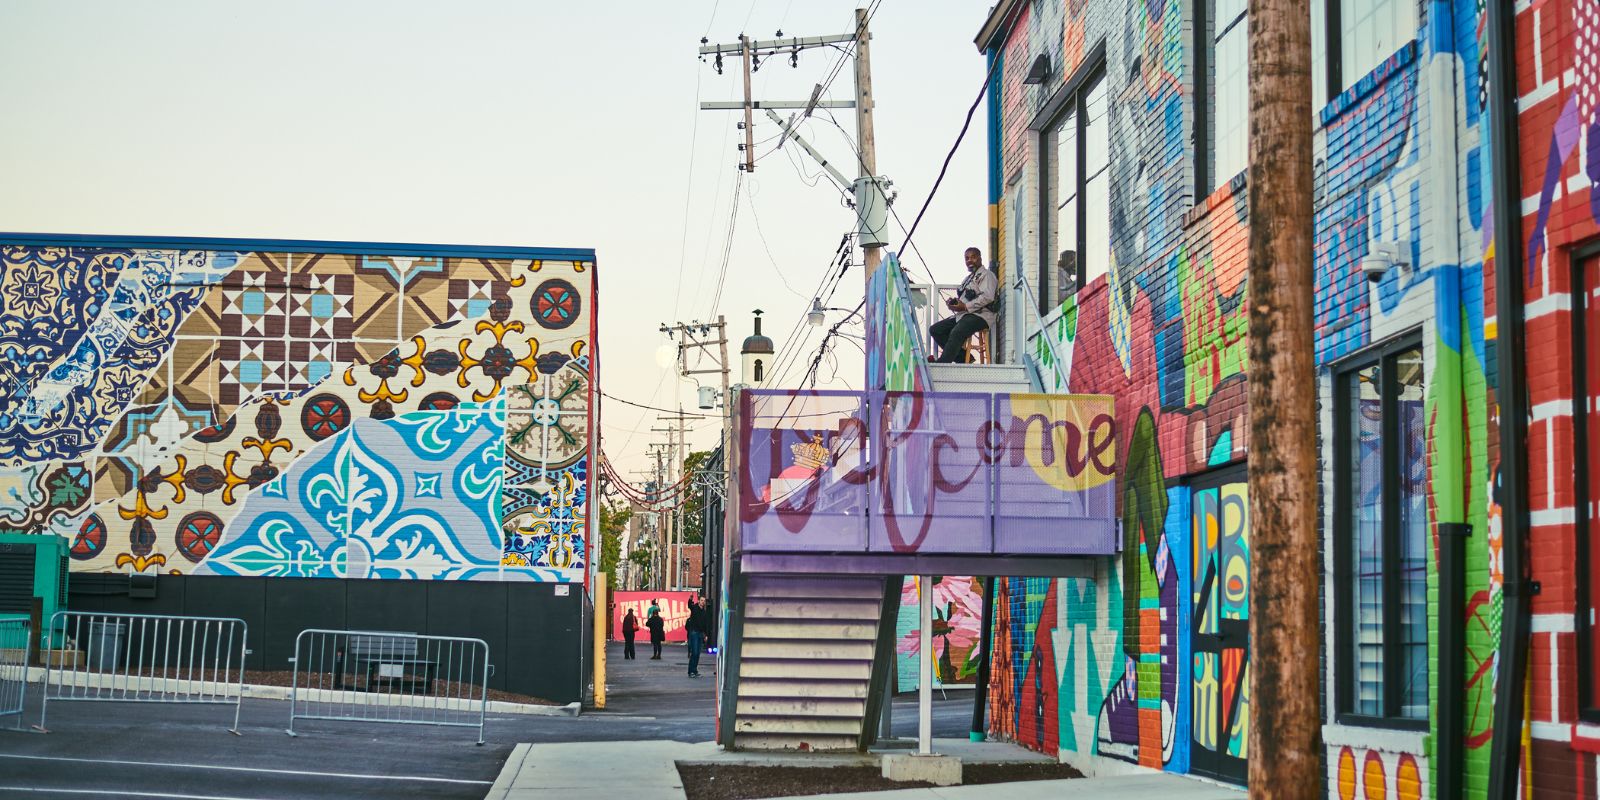 The Walls Off Washington is a new mural experience in the Grand Center Arts District.